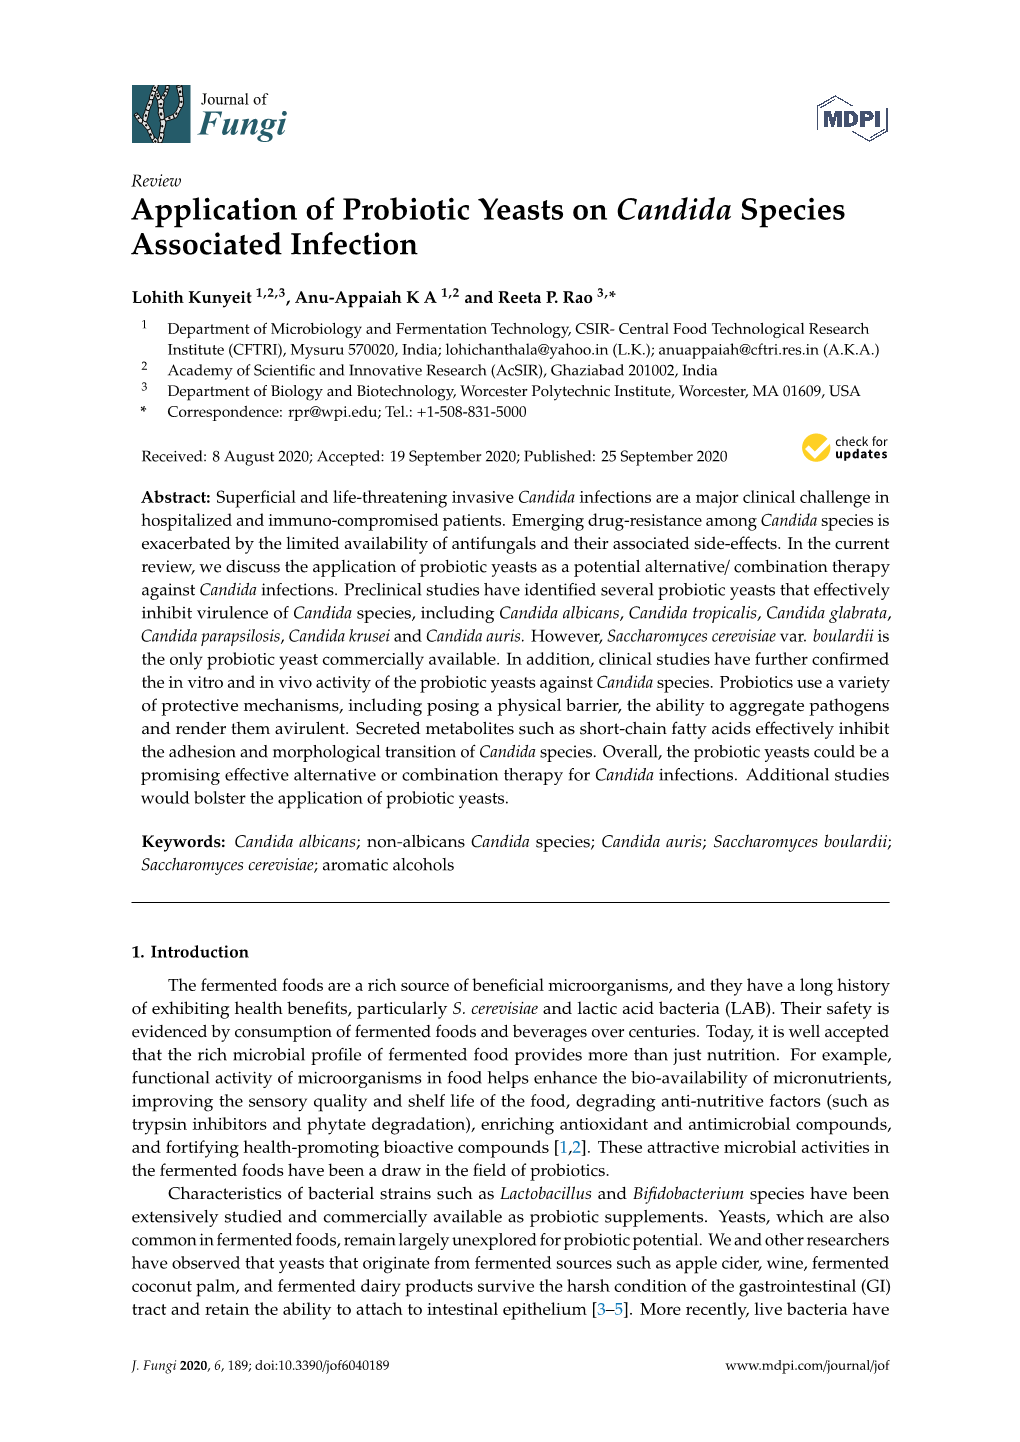 Application of Probiotic Yeasts on Candida Species Associated Infection